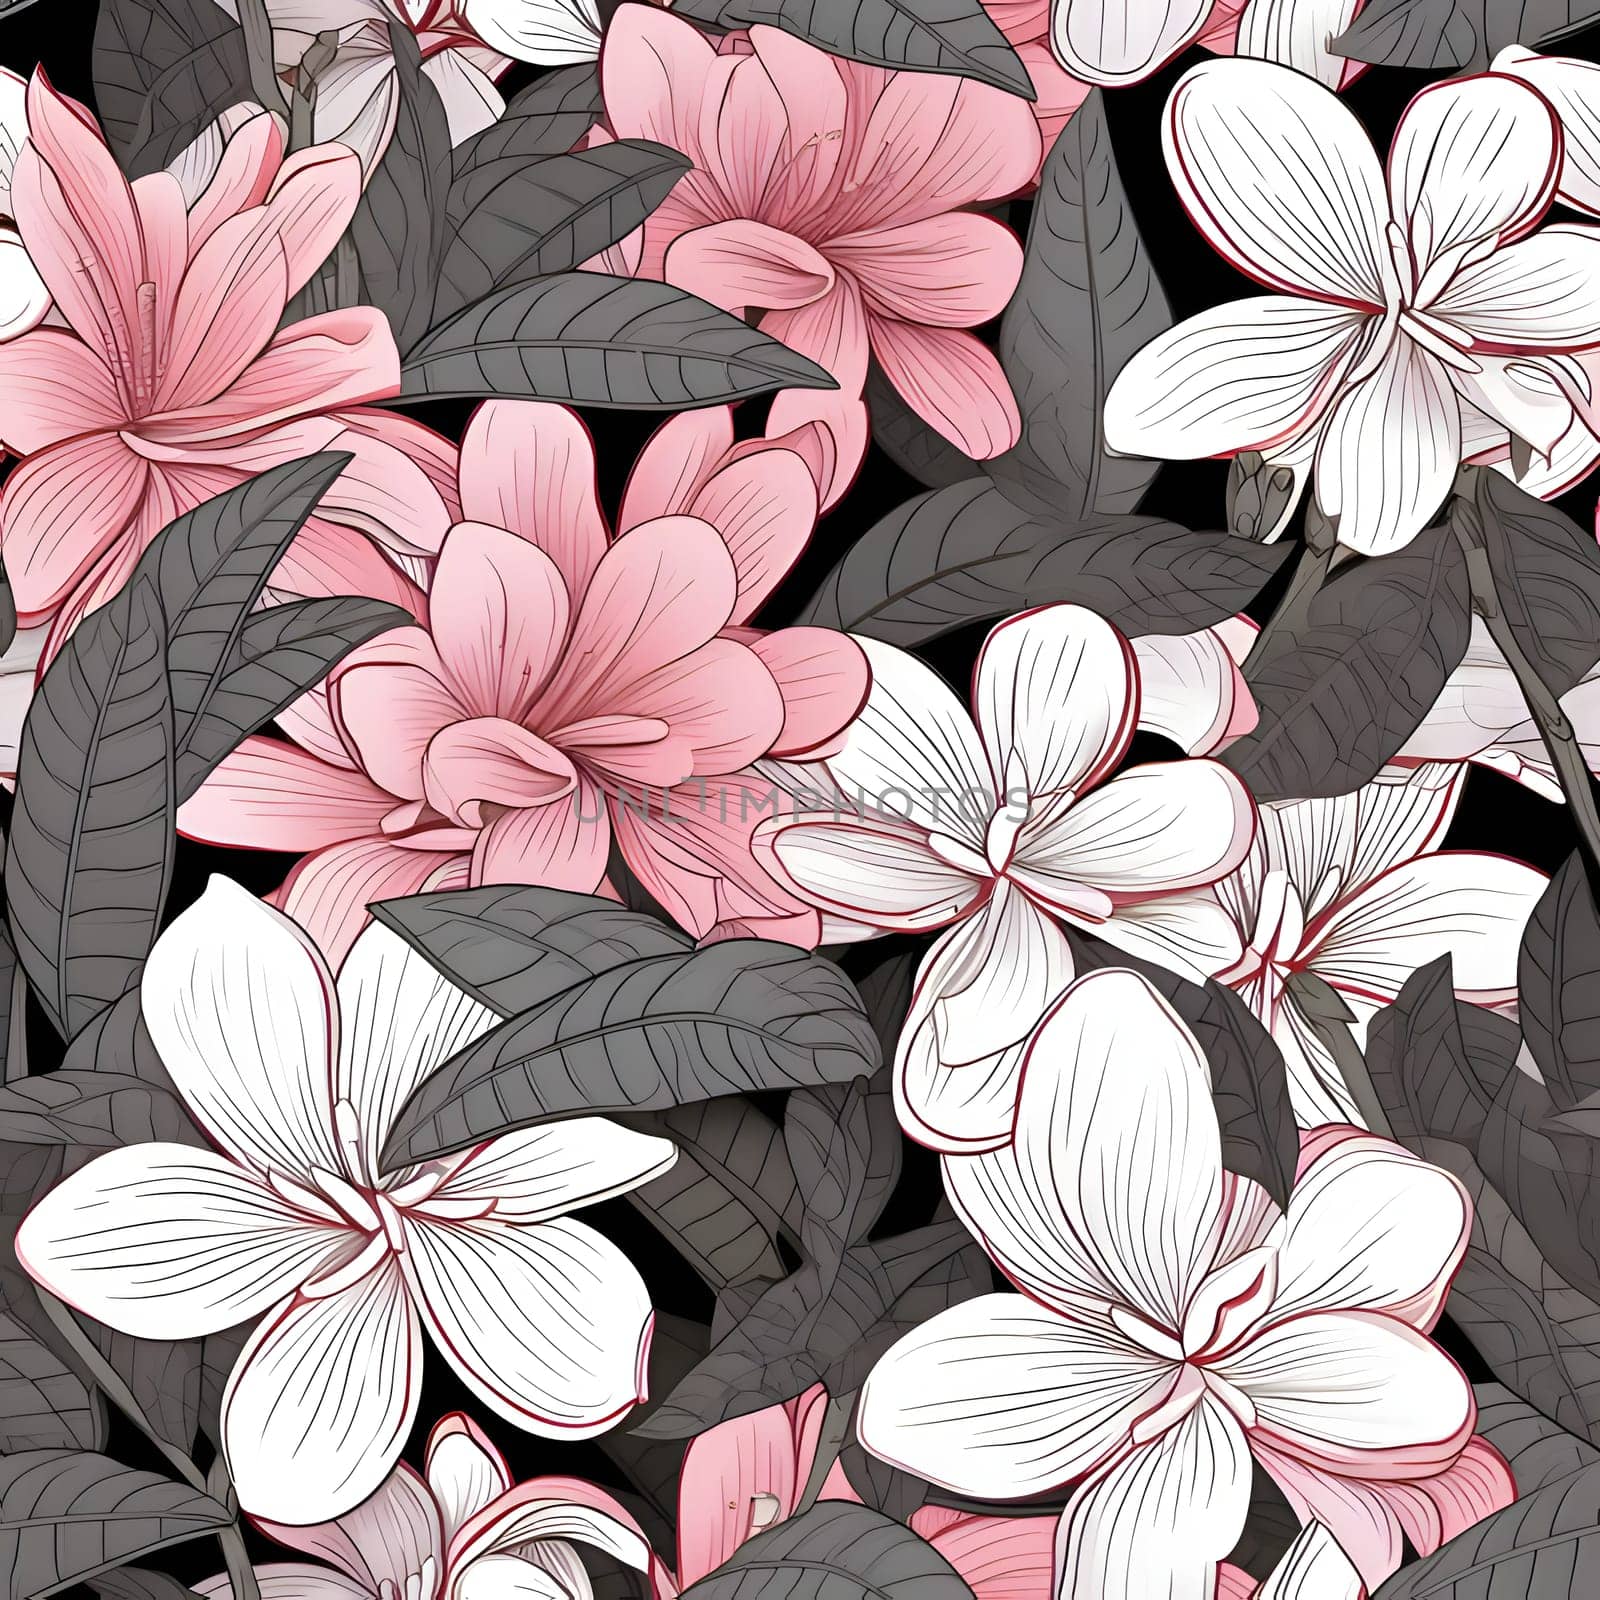 Patterns and banners backgrounds: Seamless pattern with frangipani flowers. Vector illustration.